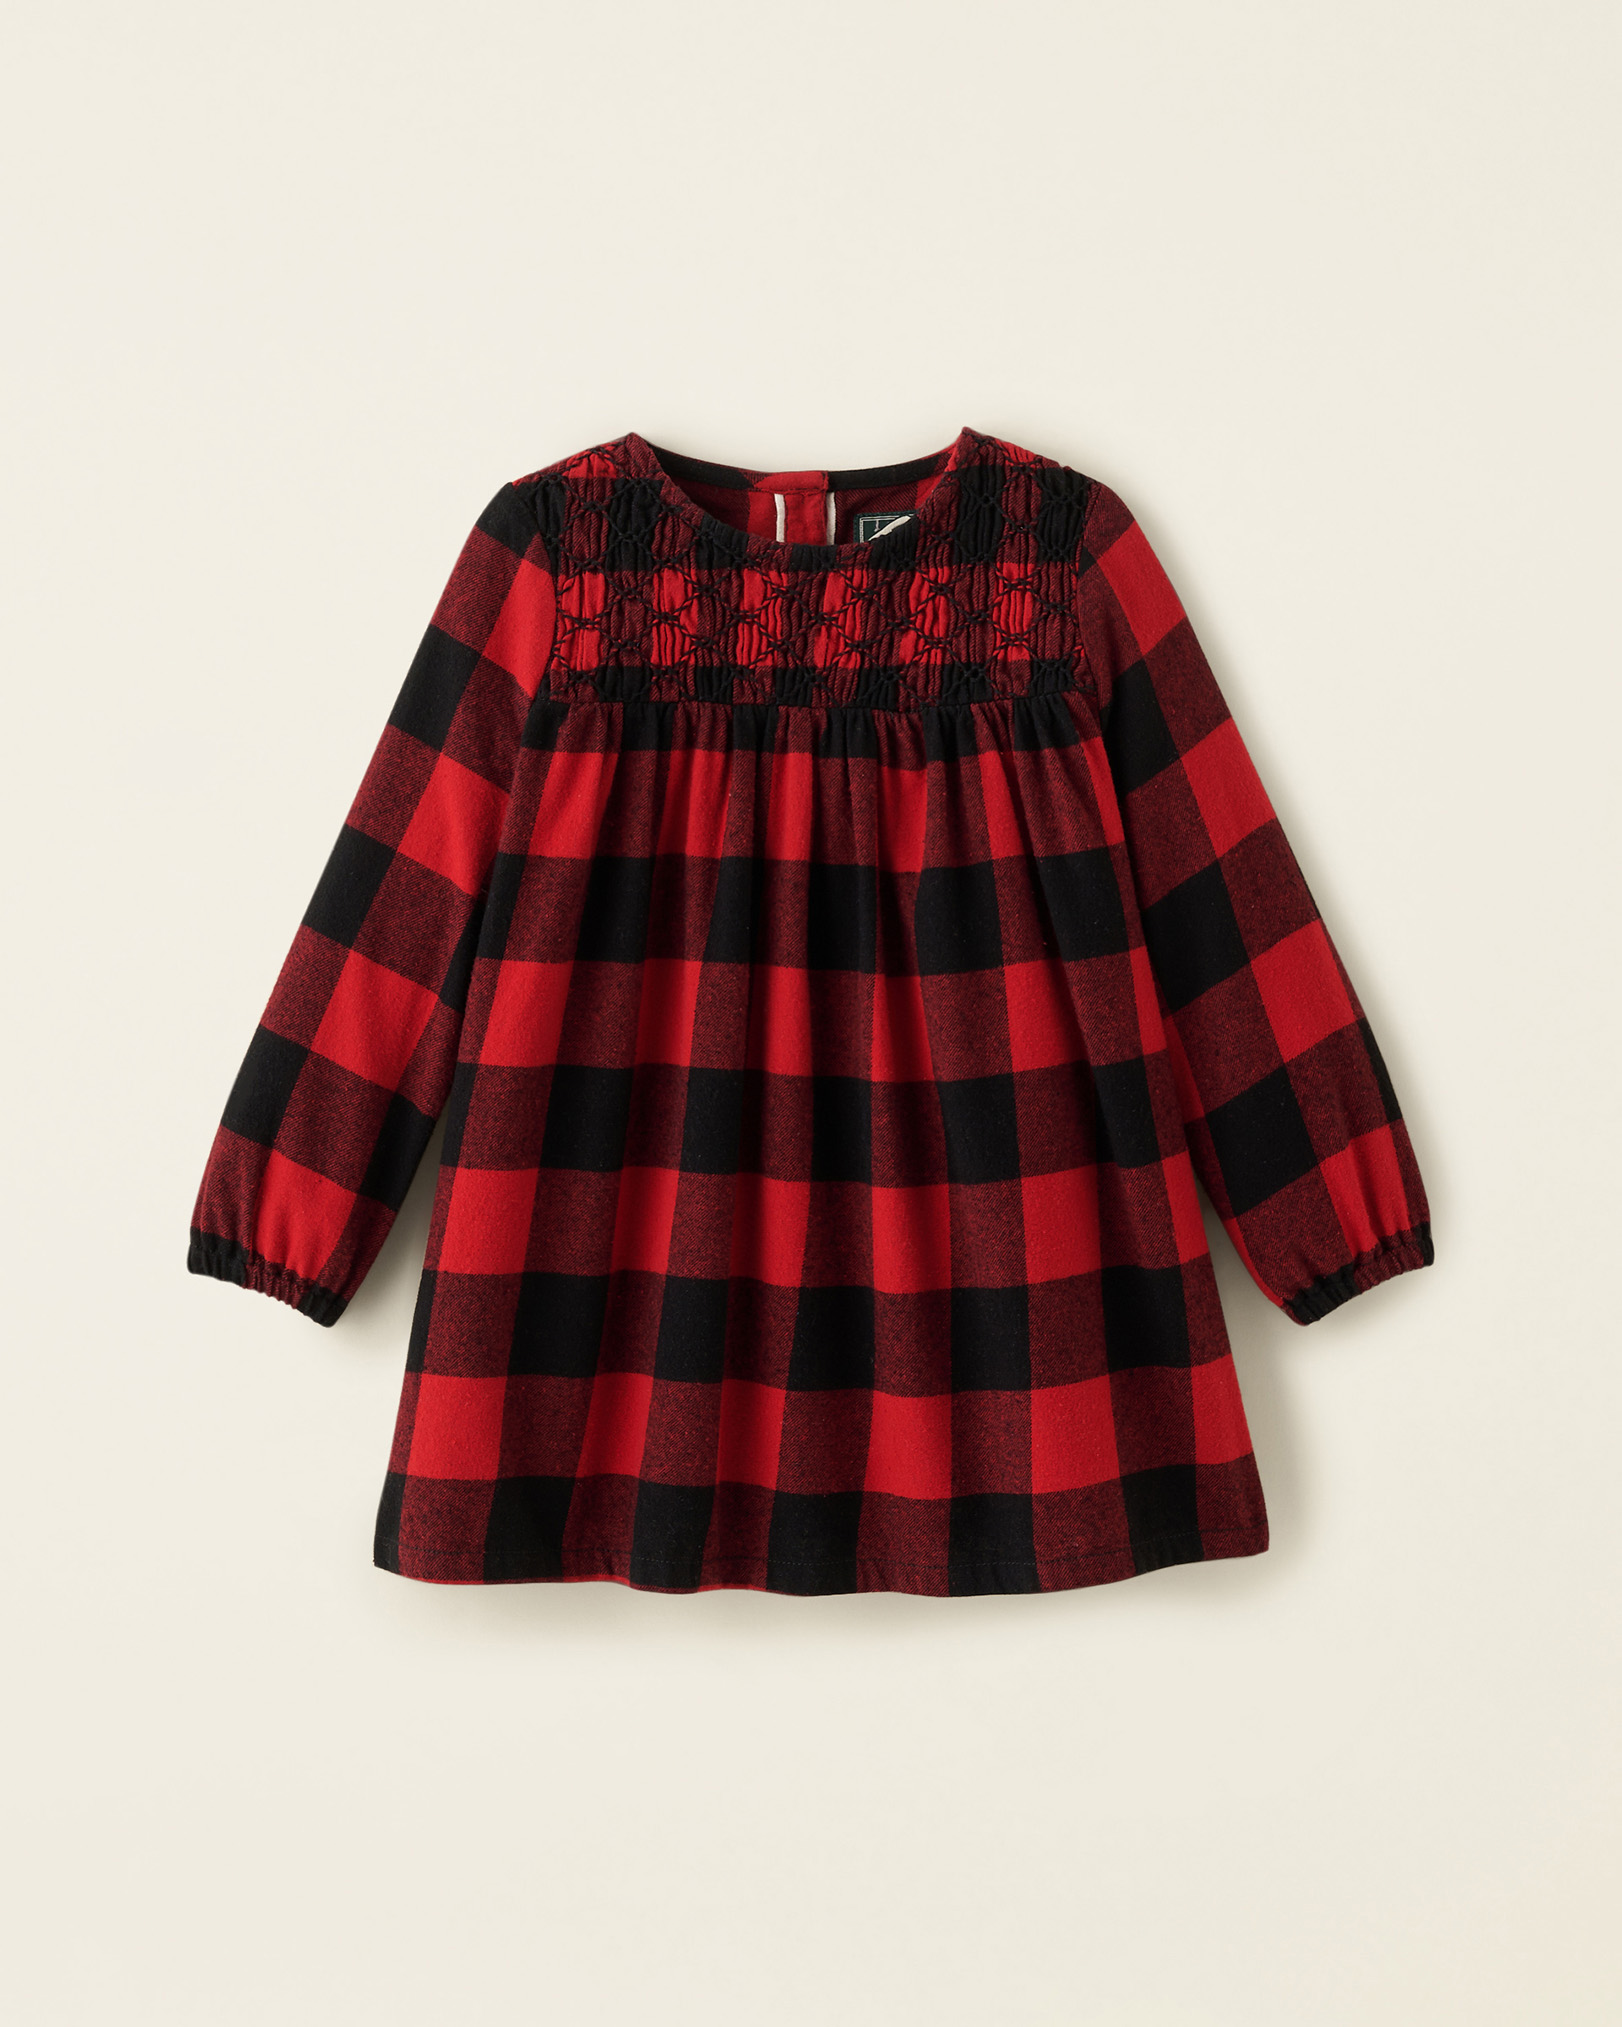 Roots Toddler Girl's Park Plaid Dress in Cabin Red